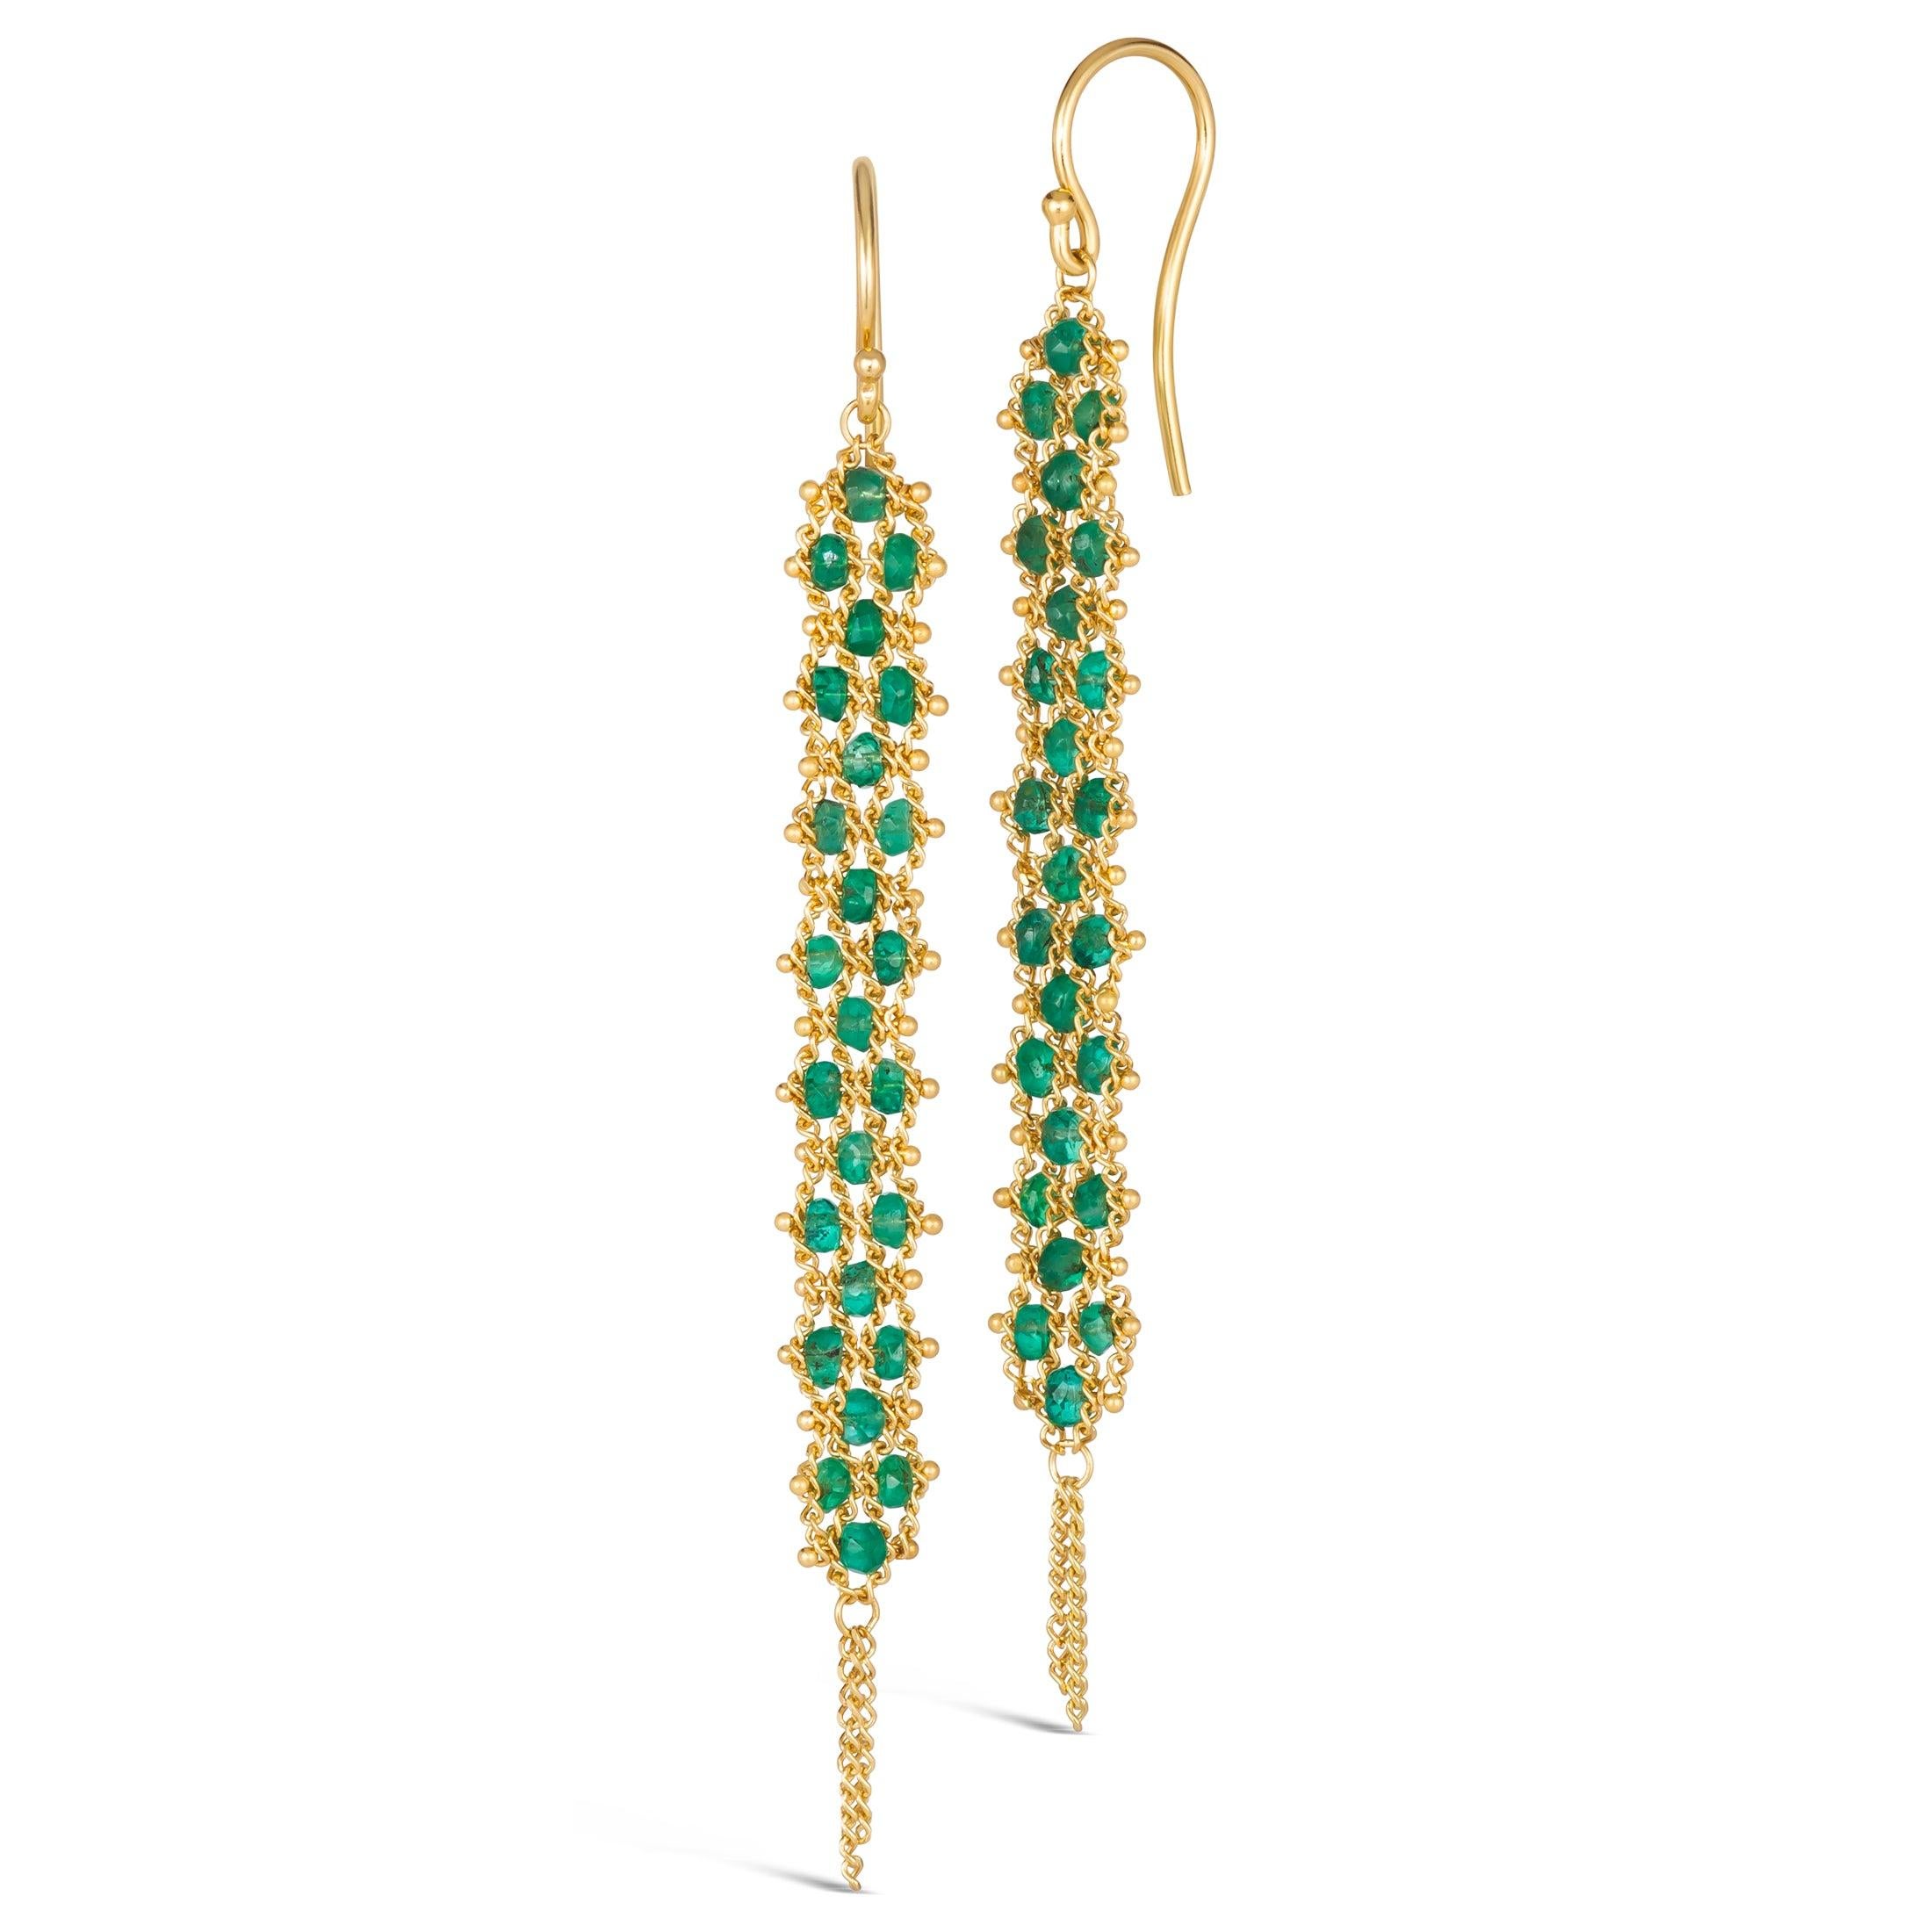 Woven Textile Earrings in Emerald In New Condition For Sale In Chapel Hill, NC